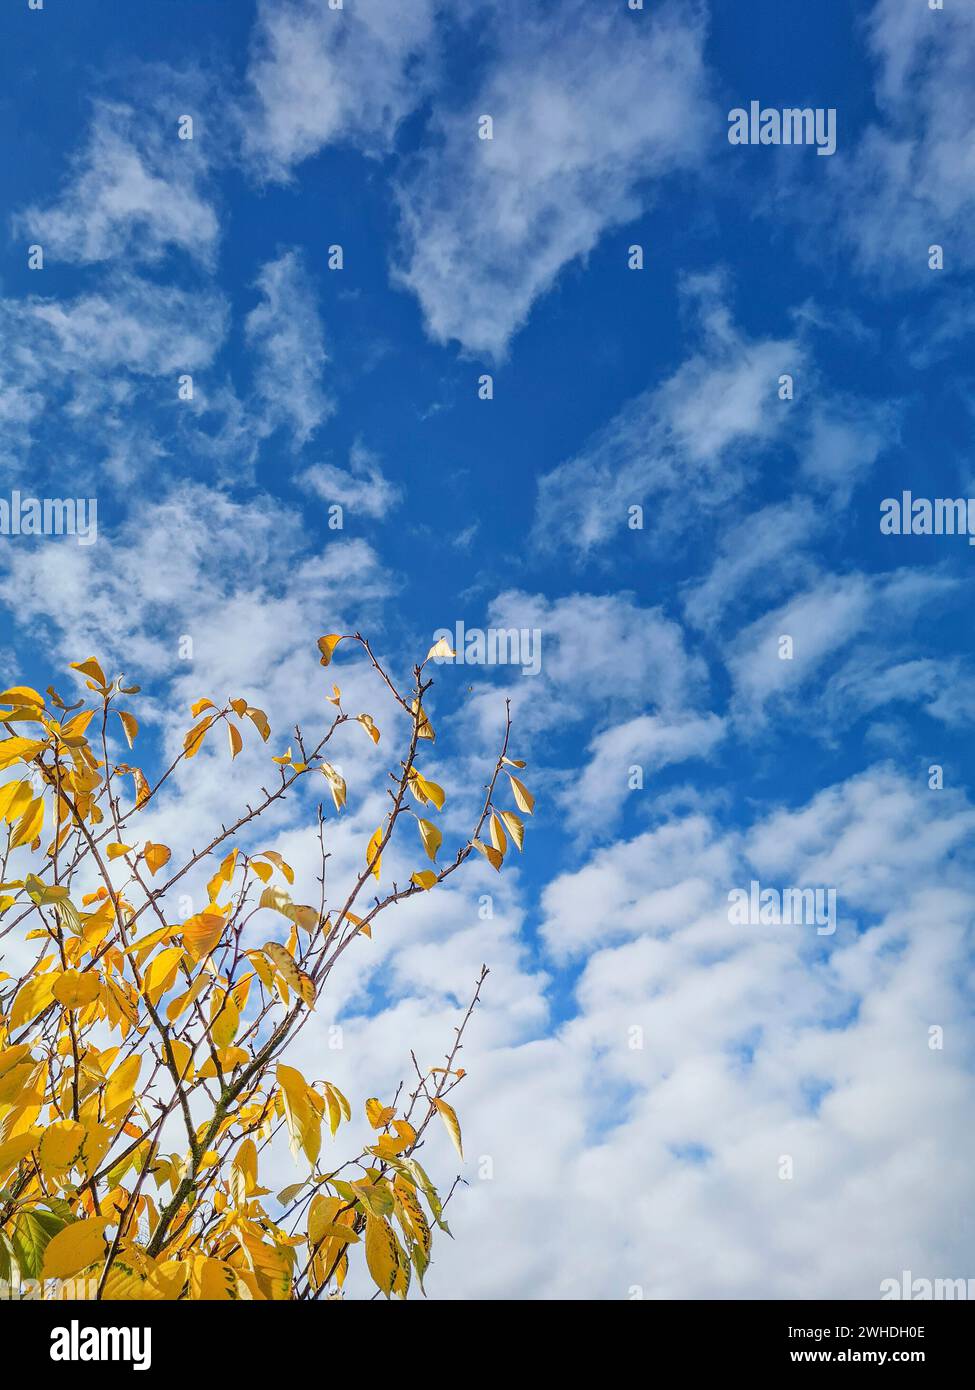 Blue sky with white clouds on a sunny day in fall with yellow leaves in the sunlight in the foreground Stock Photo